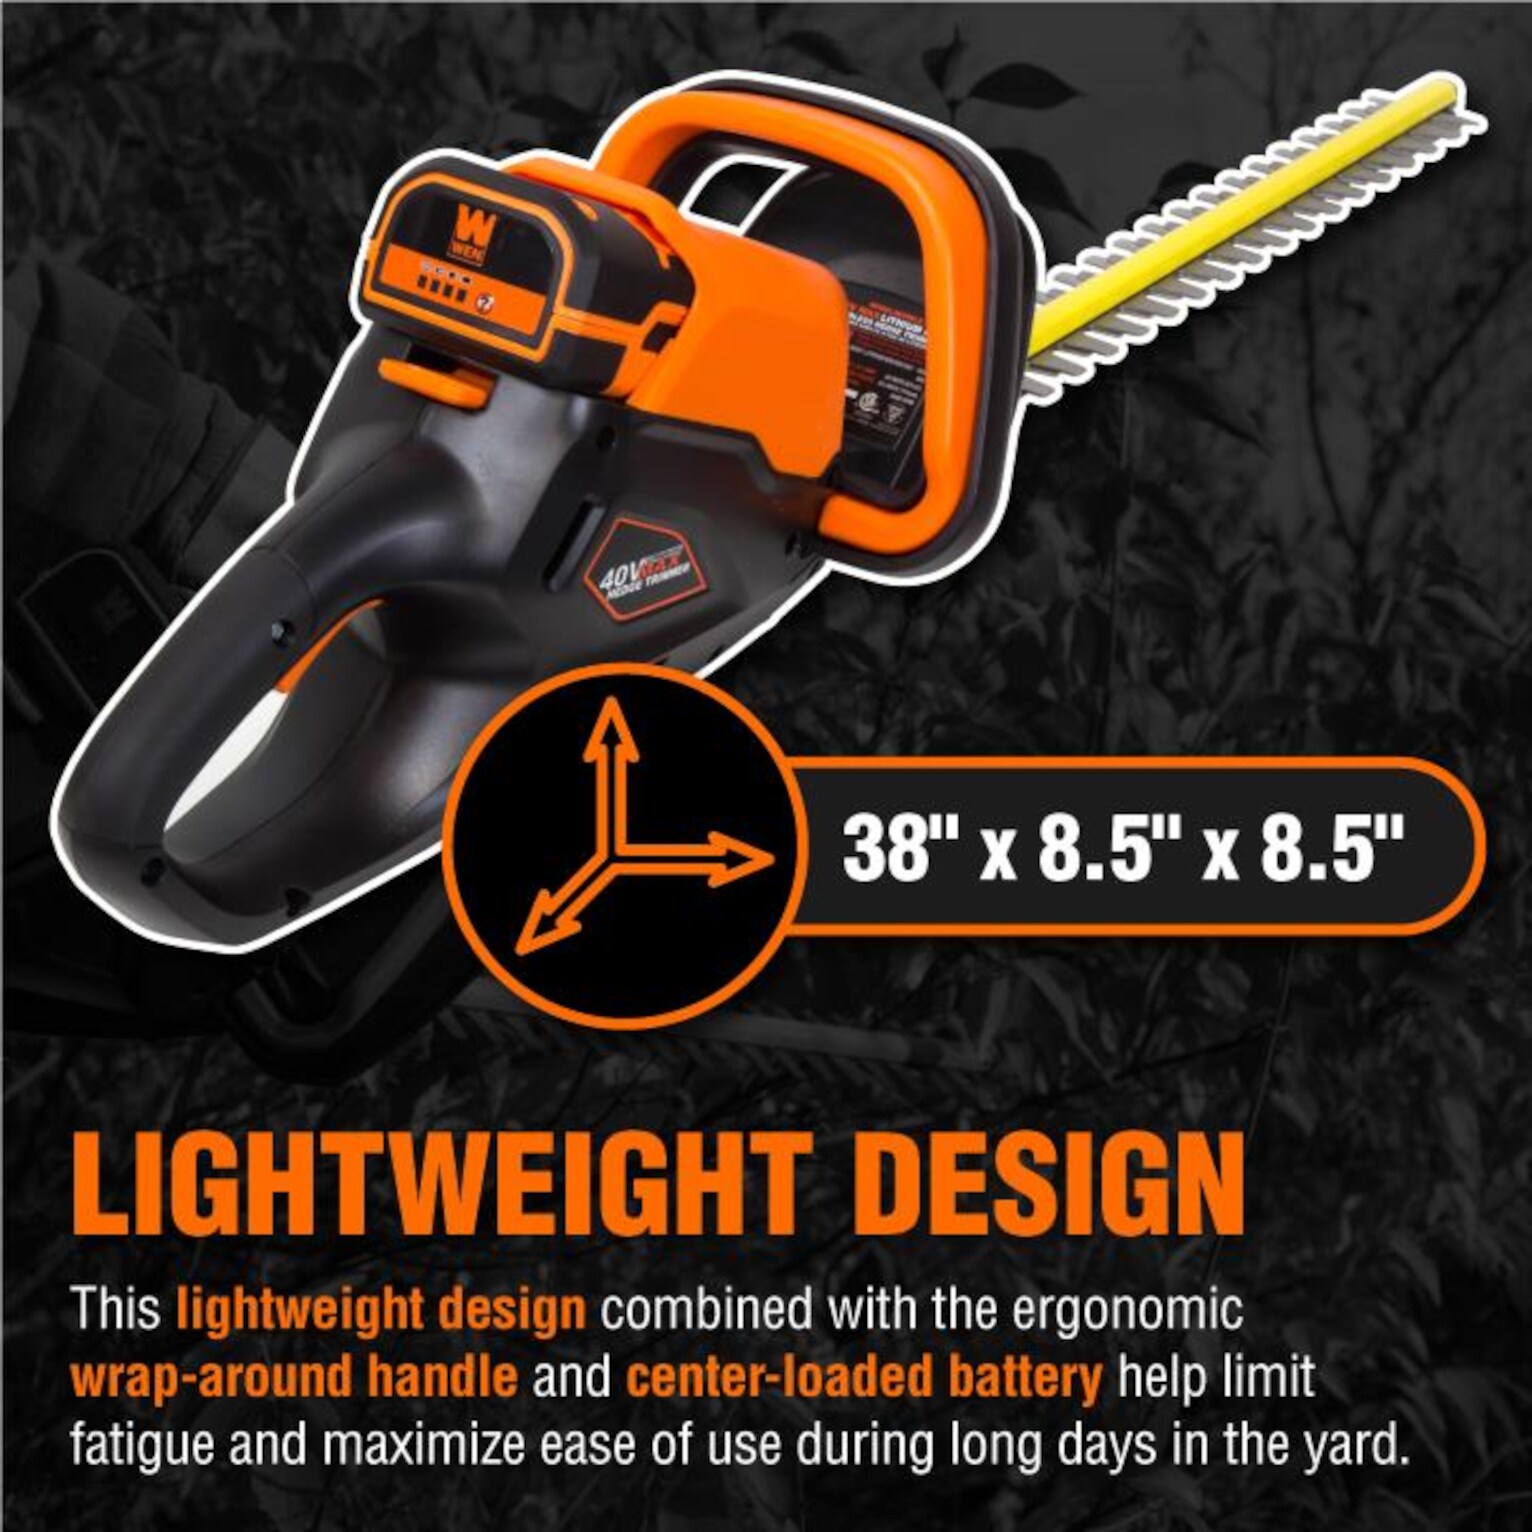 Hedge trimmer Texas HTX4000; 40 V; 1x2,5 Ah cordless; 58 cm length -  90066662 - Hedge trimmers - Other garden machinery